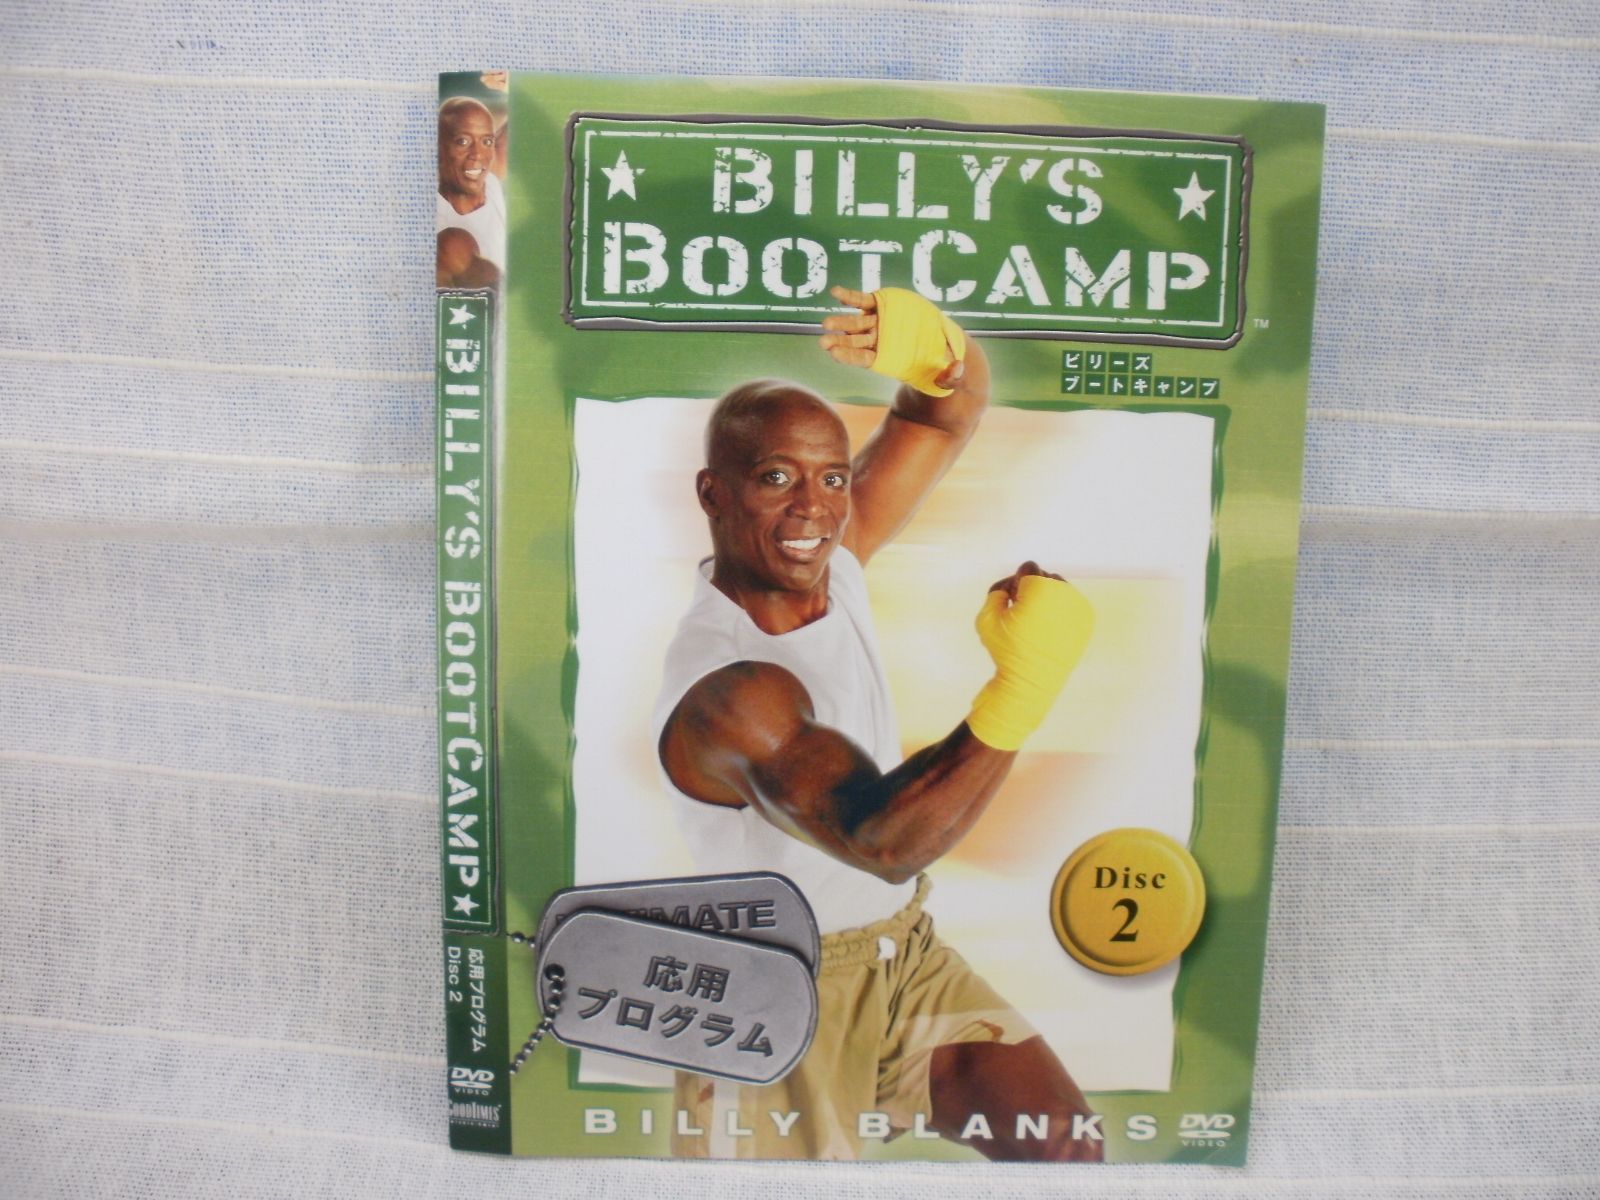 BillY'S Bootcamp Disk3 - スポーツ・フィットネス